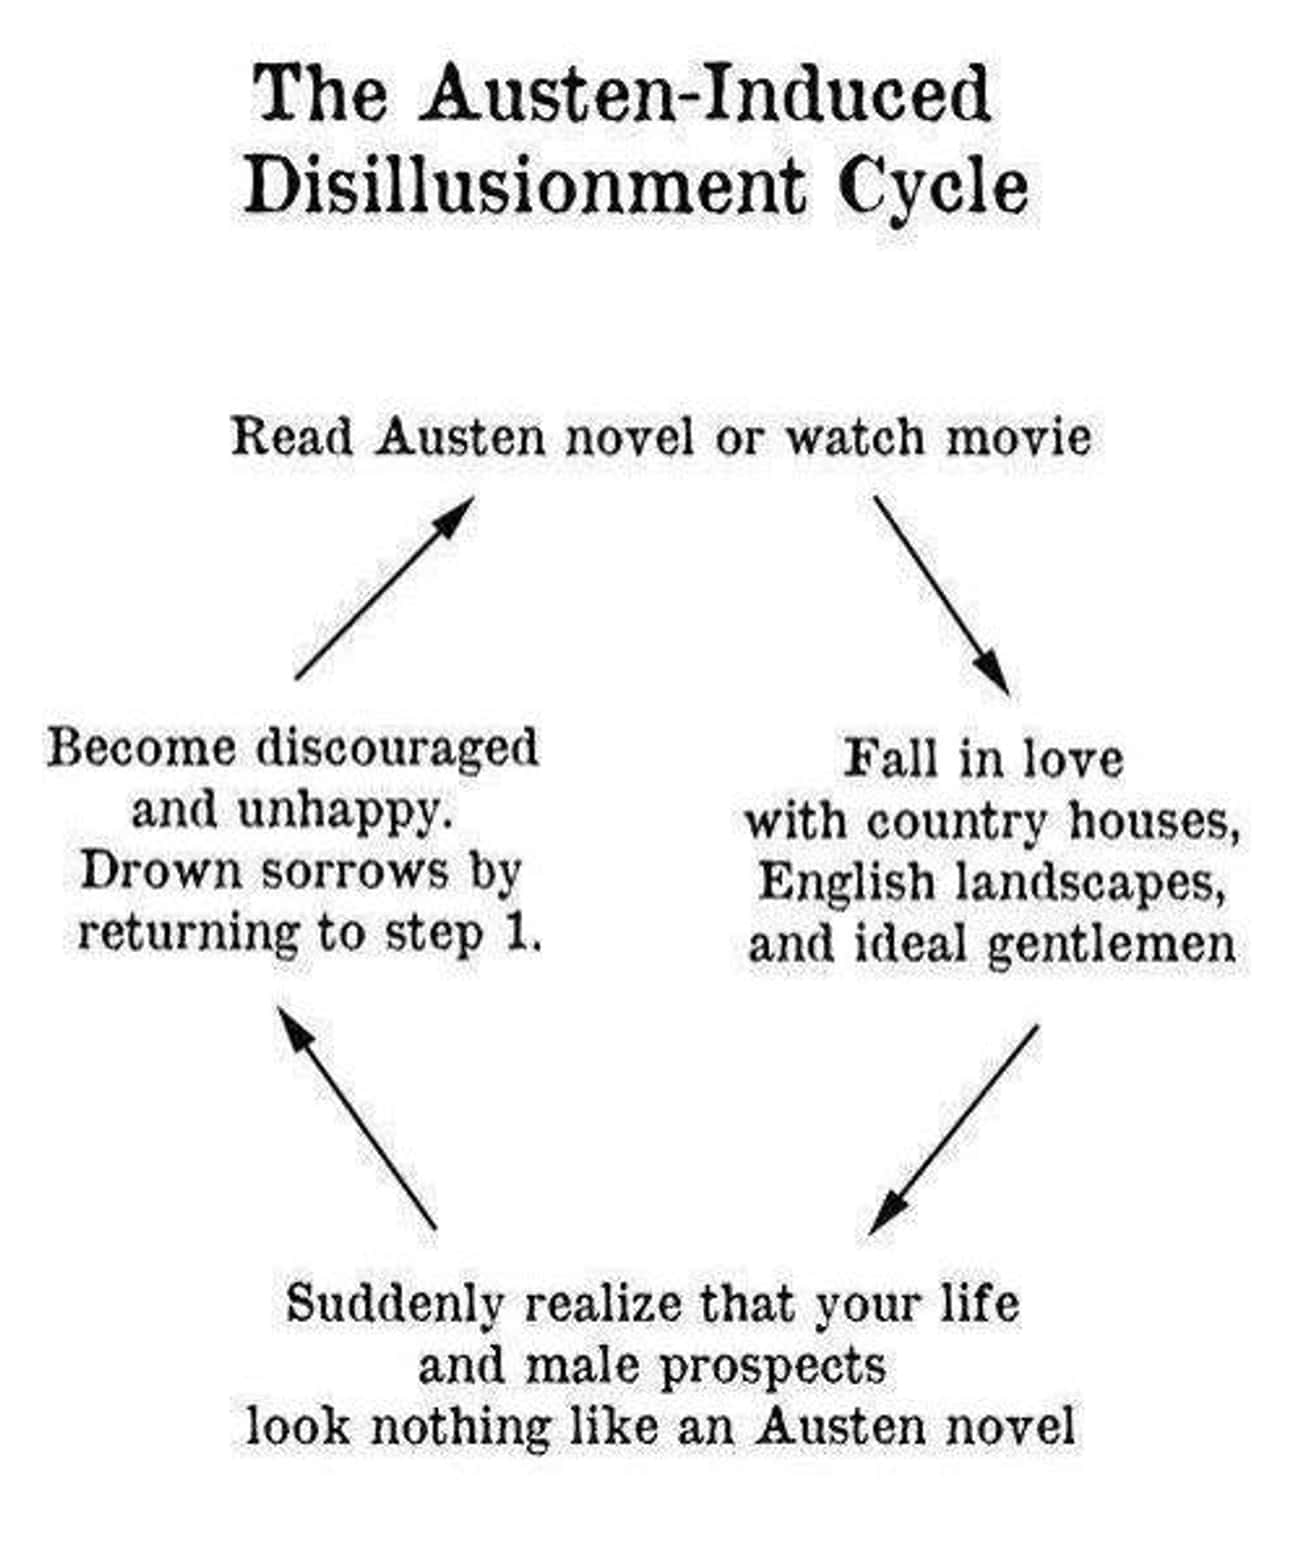 The Austen-Induced Disillusionment Cycle